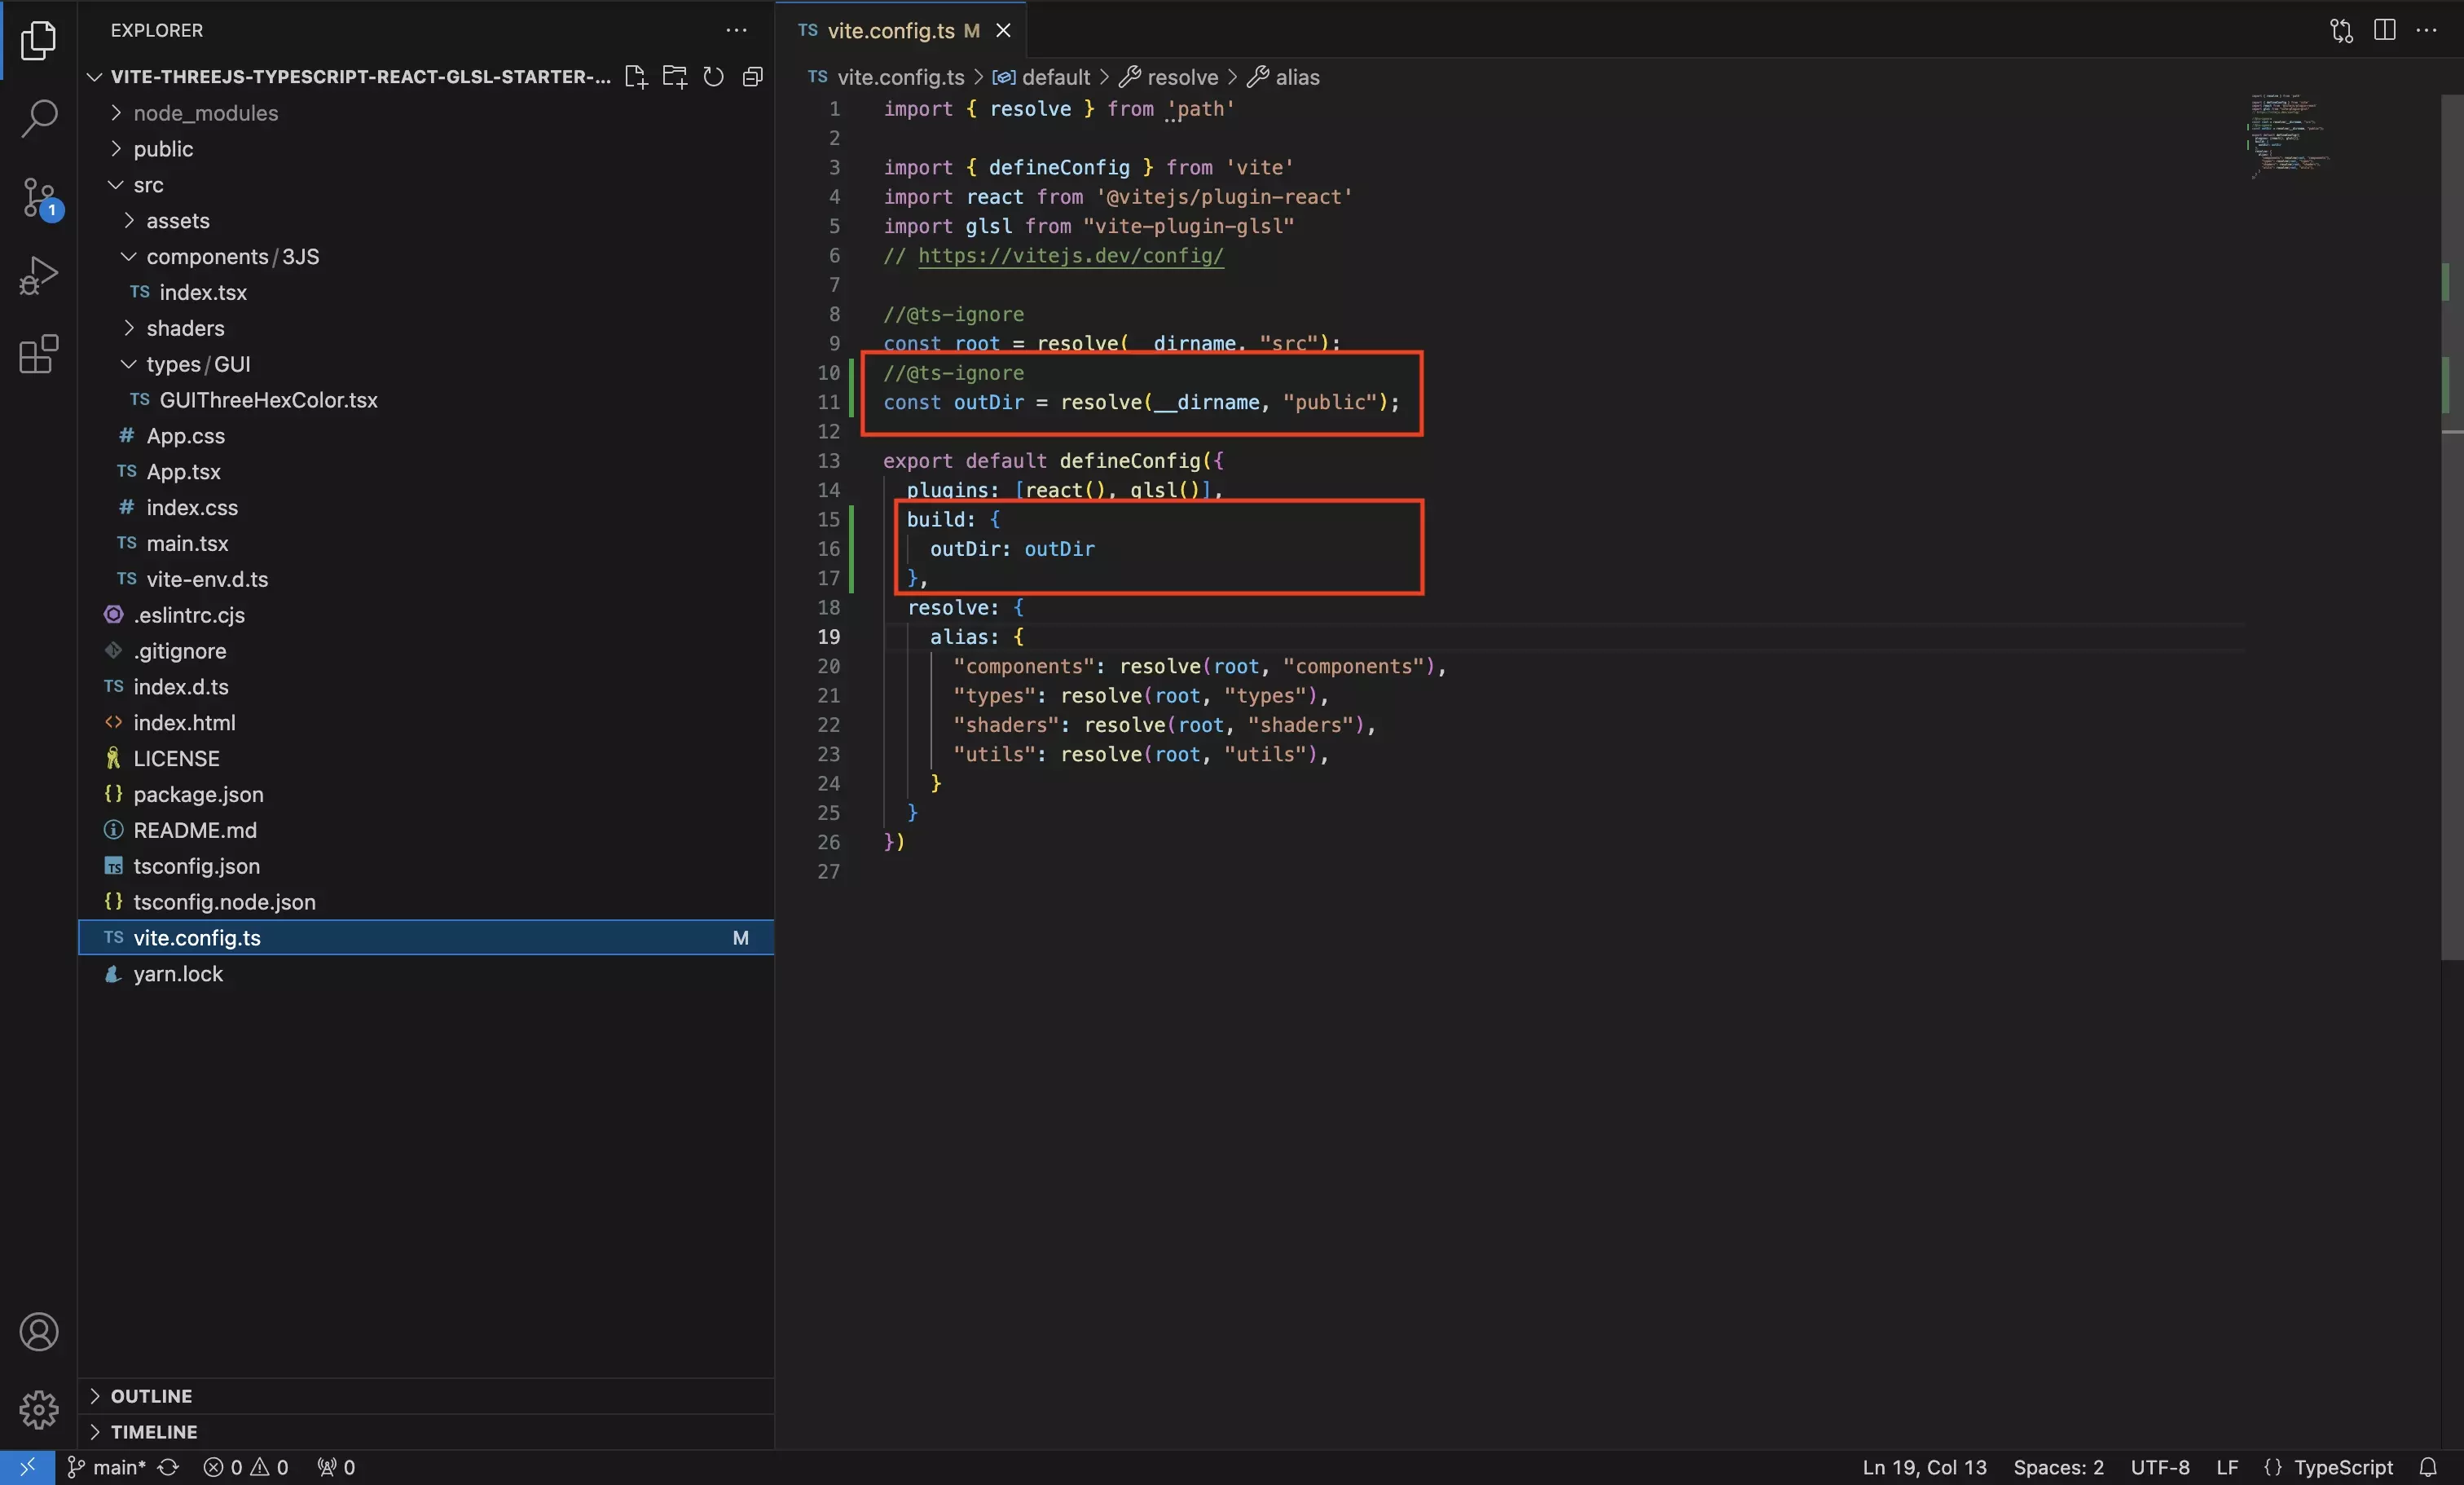 A screenshot of VSCode showing how we setup the outDir within the vite.config.ts file. This config is setup to output the build to the "public" folder at the root of the project.